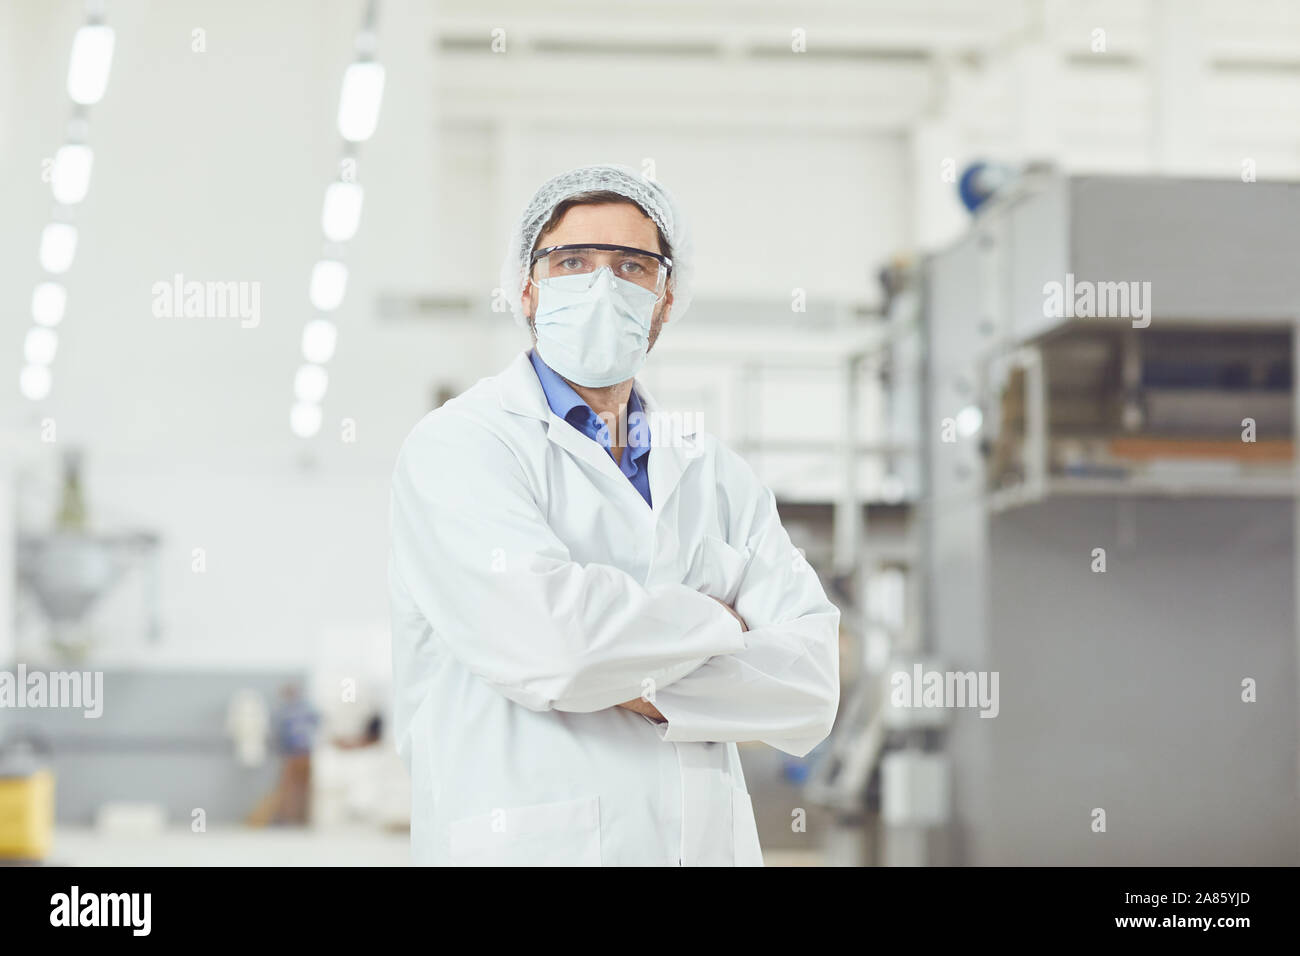 Technologist in a mask at work. Stock Photo